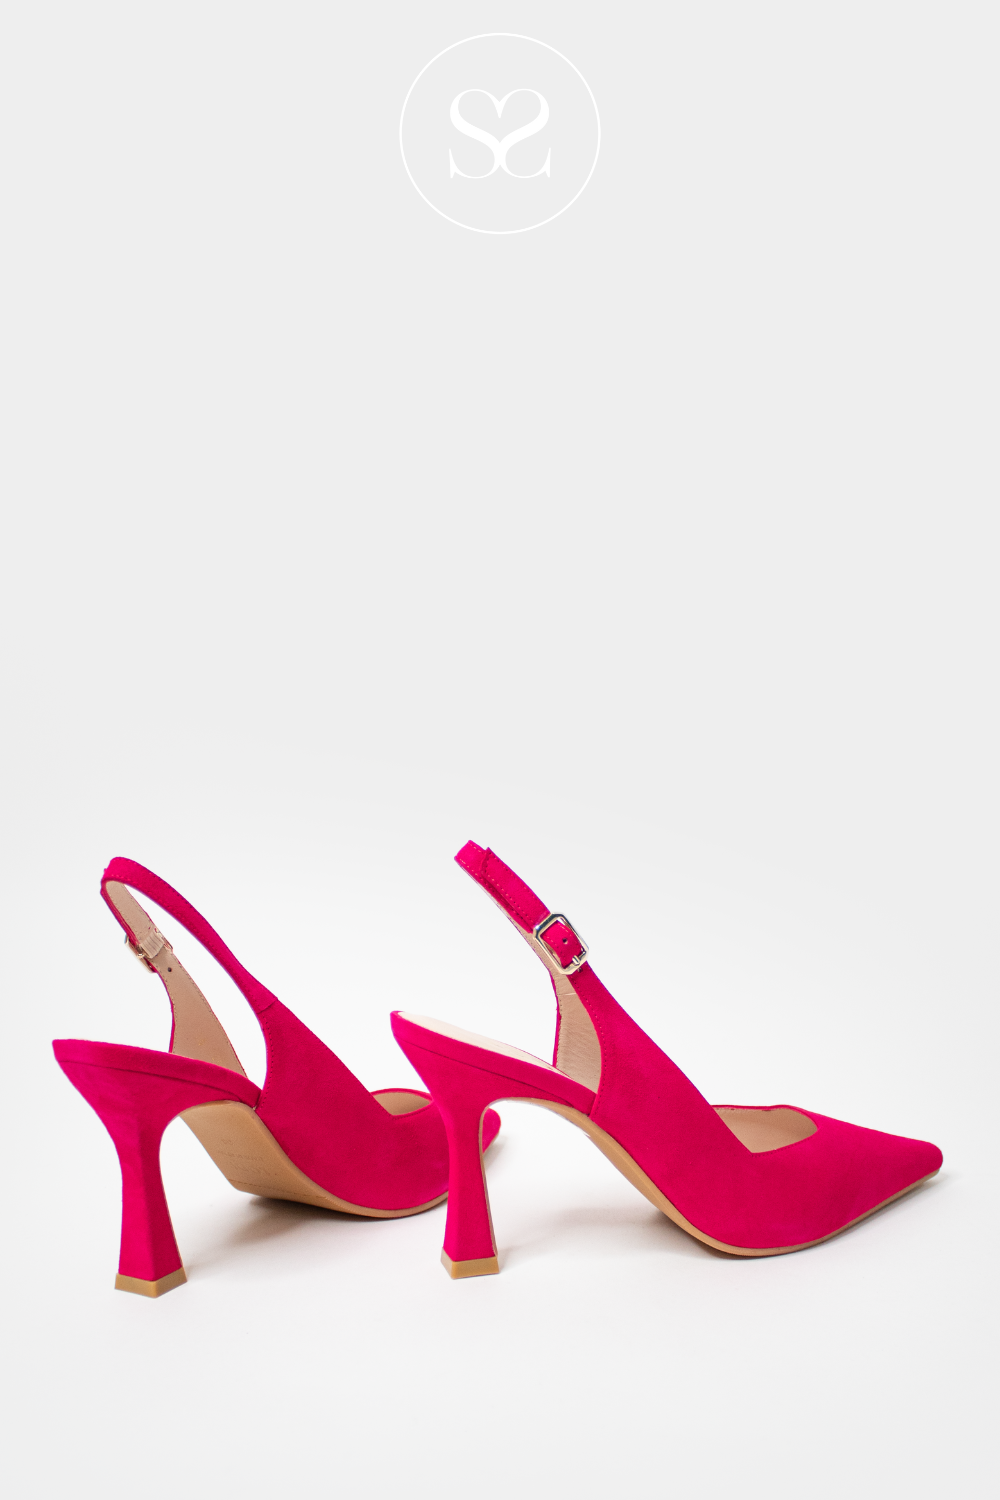 VLODI MODERN PINK SUEDE POINTED TOE SLINGBACK HIGH HEEL WITH SCULPTED HEEL AND ADJUSTABLE ANKLE STRAP